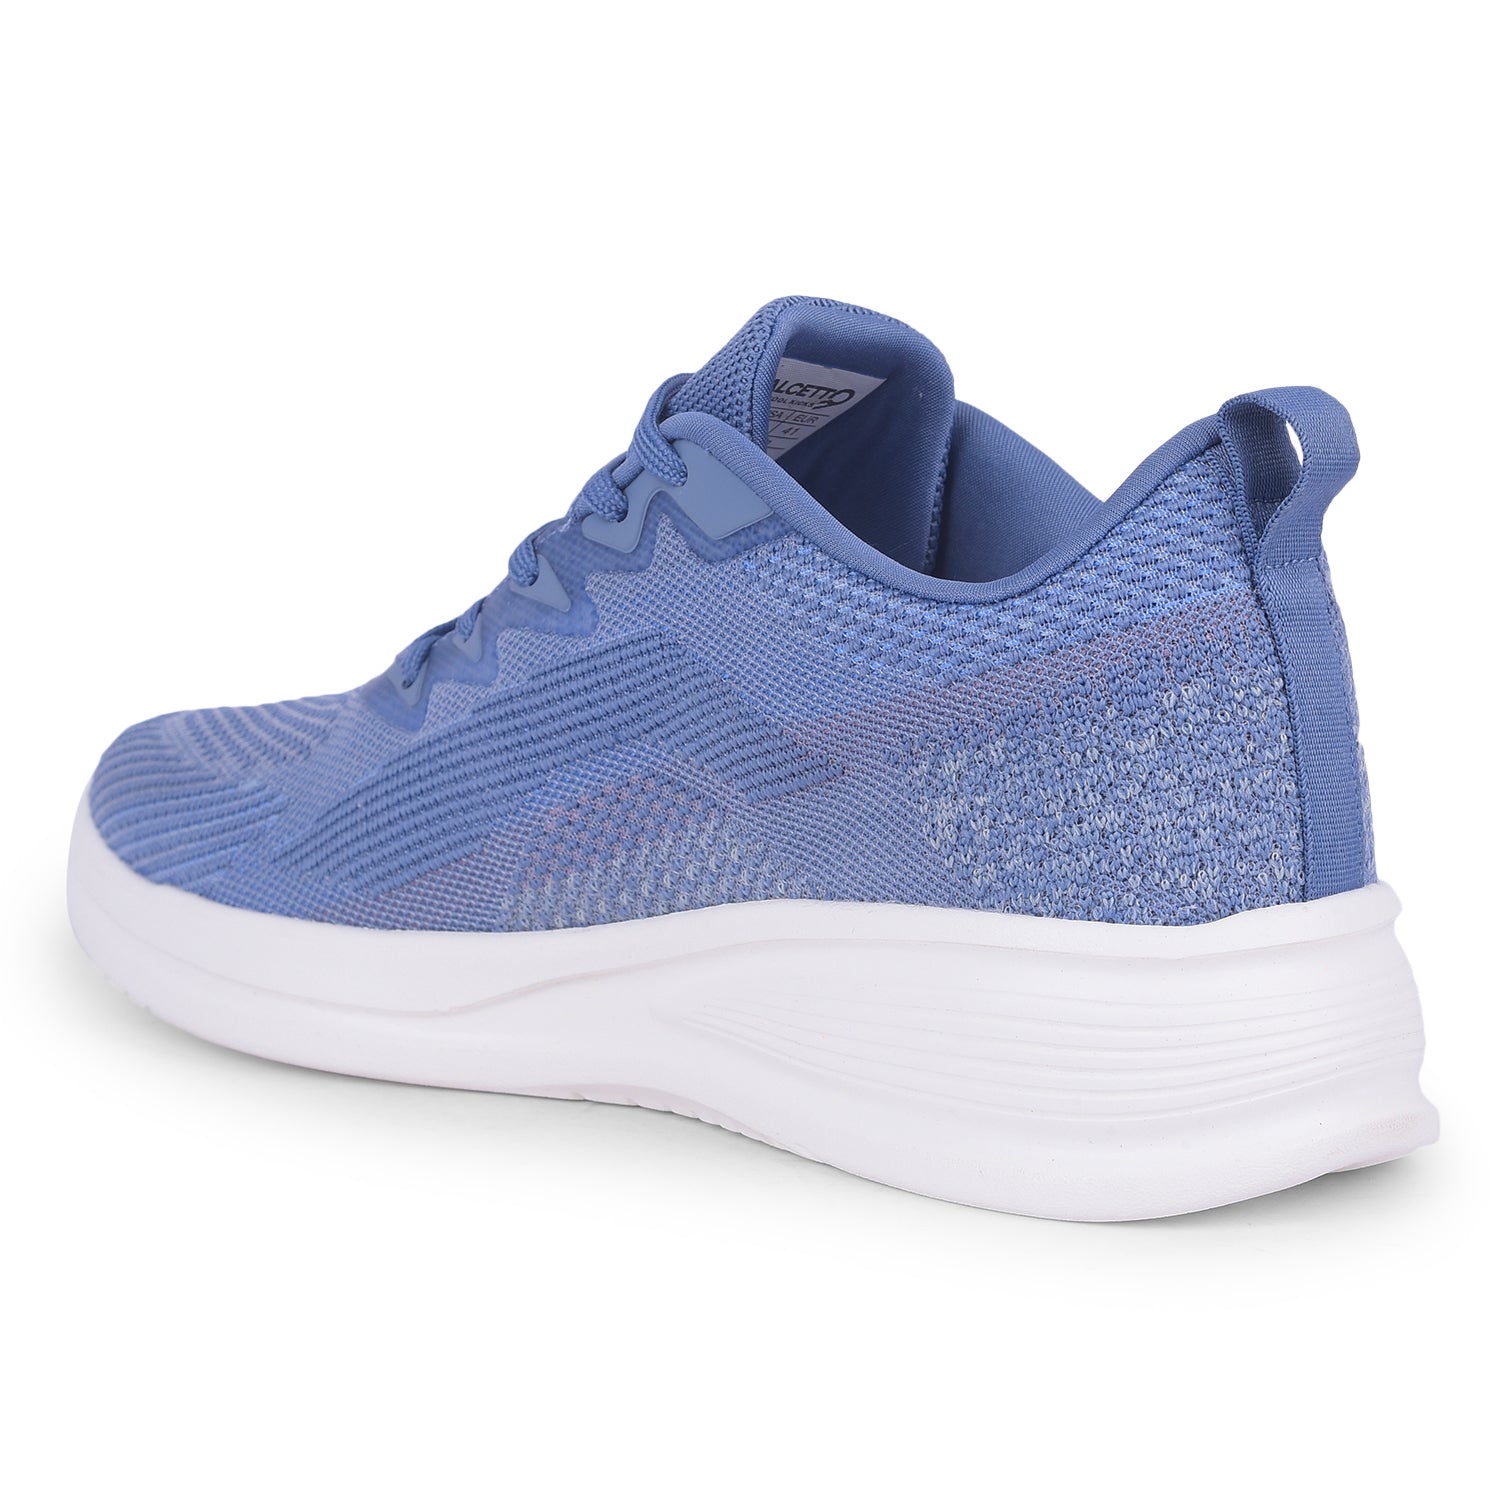 Calcetto CLT-2046 Sky Sports Shoes For Men